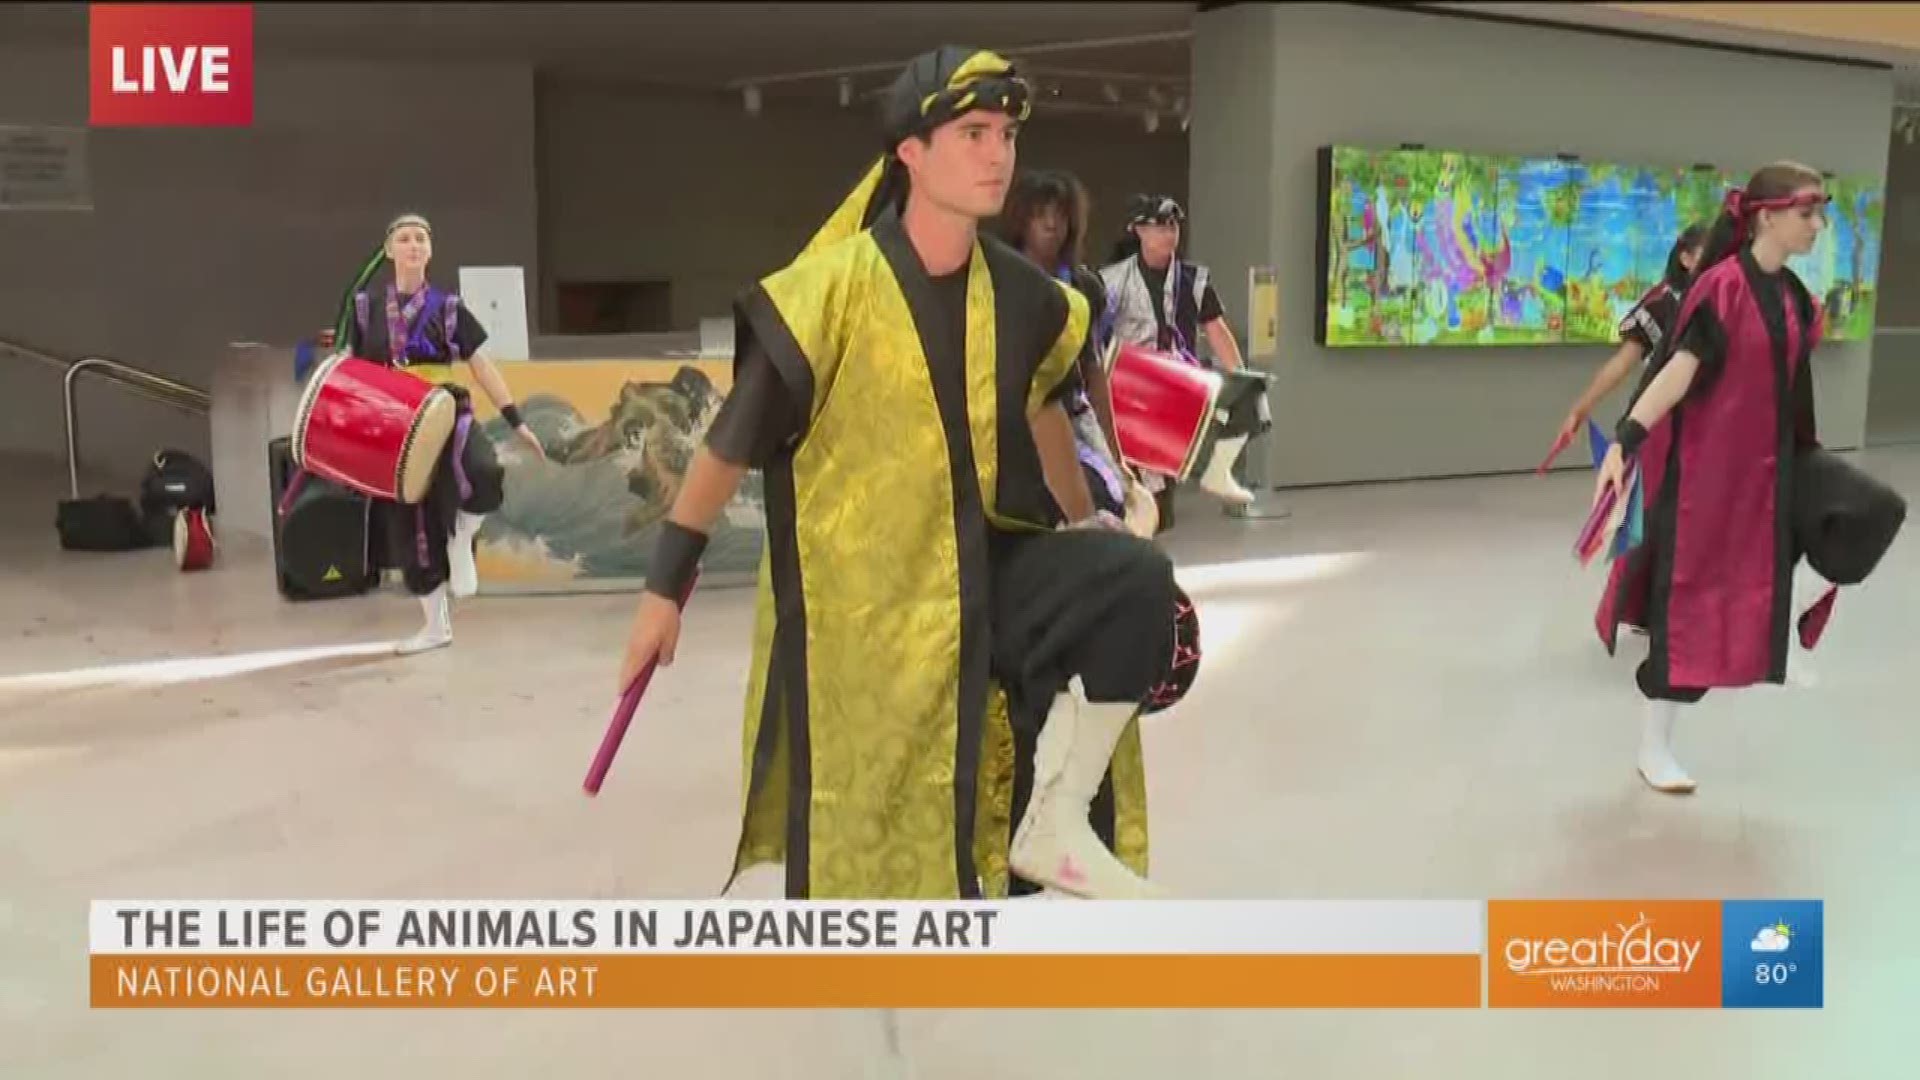 Rodd Chin and a few dancers show us a modernized performance of the traditional Japanese dance, taiko. Check out Chin and more at the Life of the Animals in Japanese Art exhibit, this weekend June 22-23 at the National Gallery of Art.